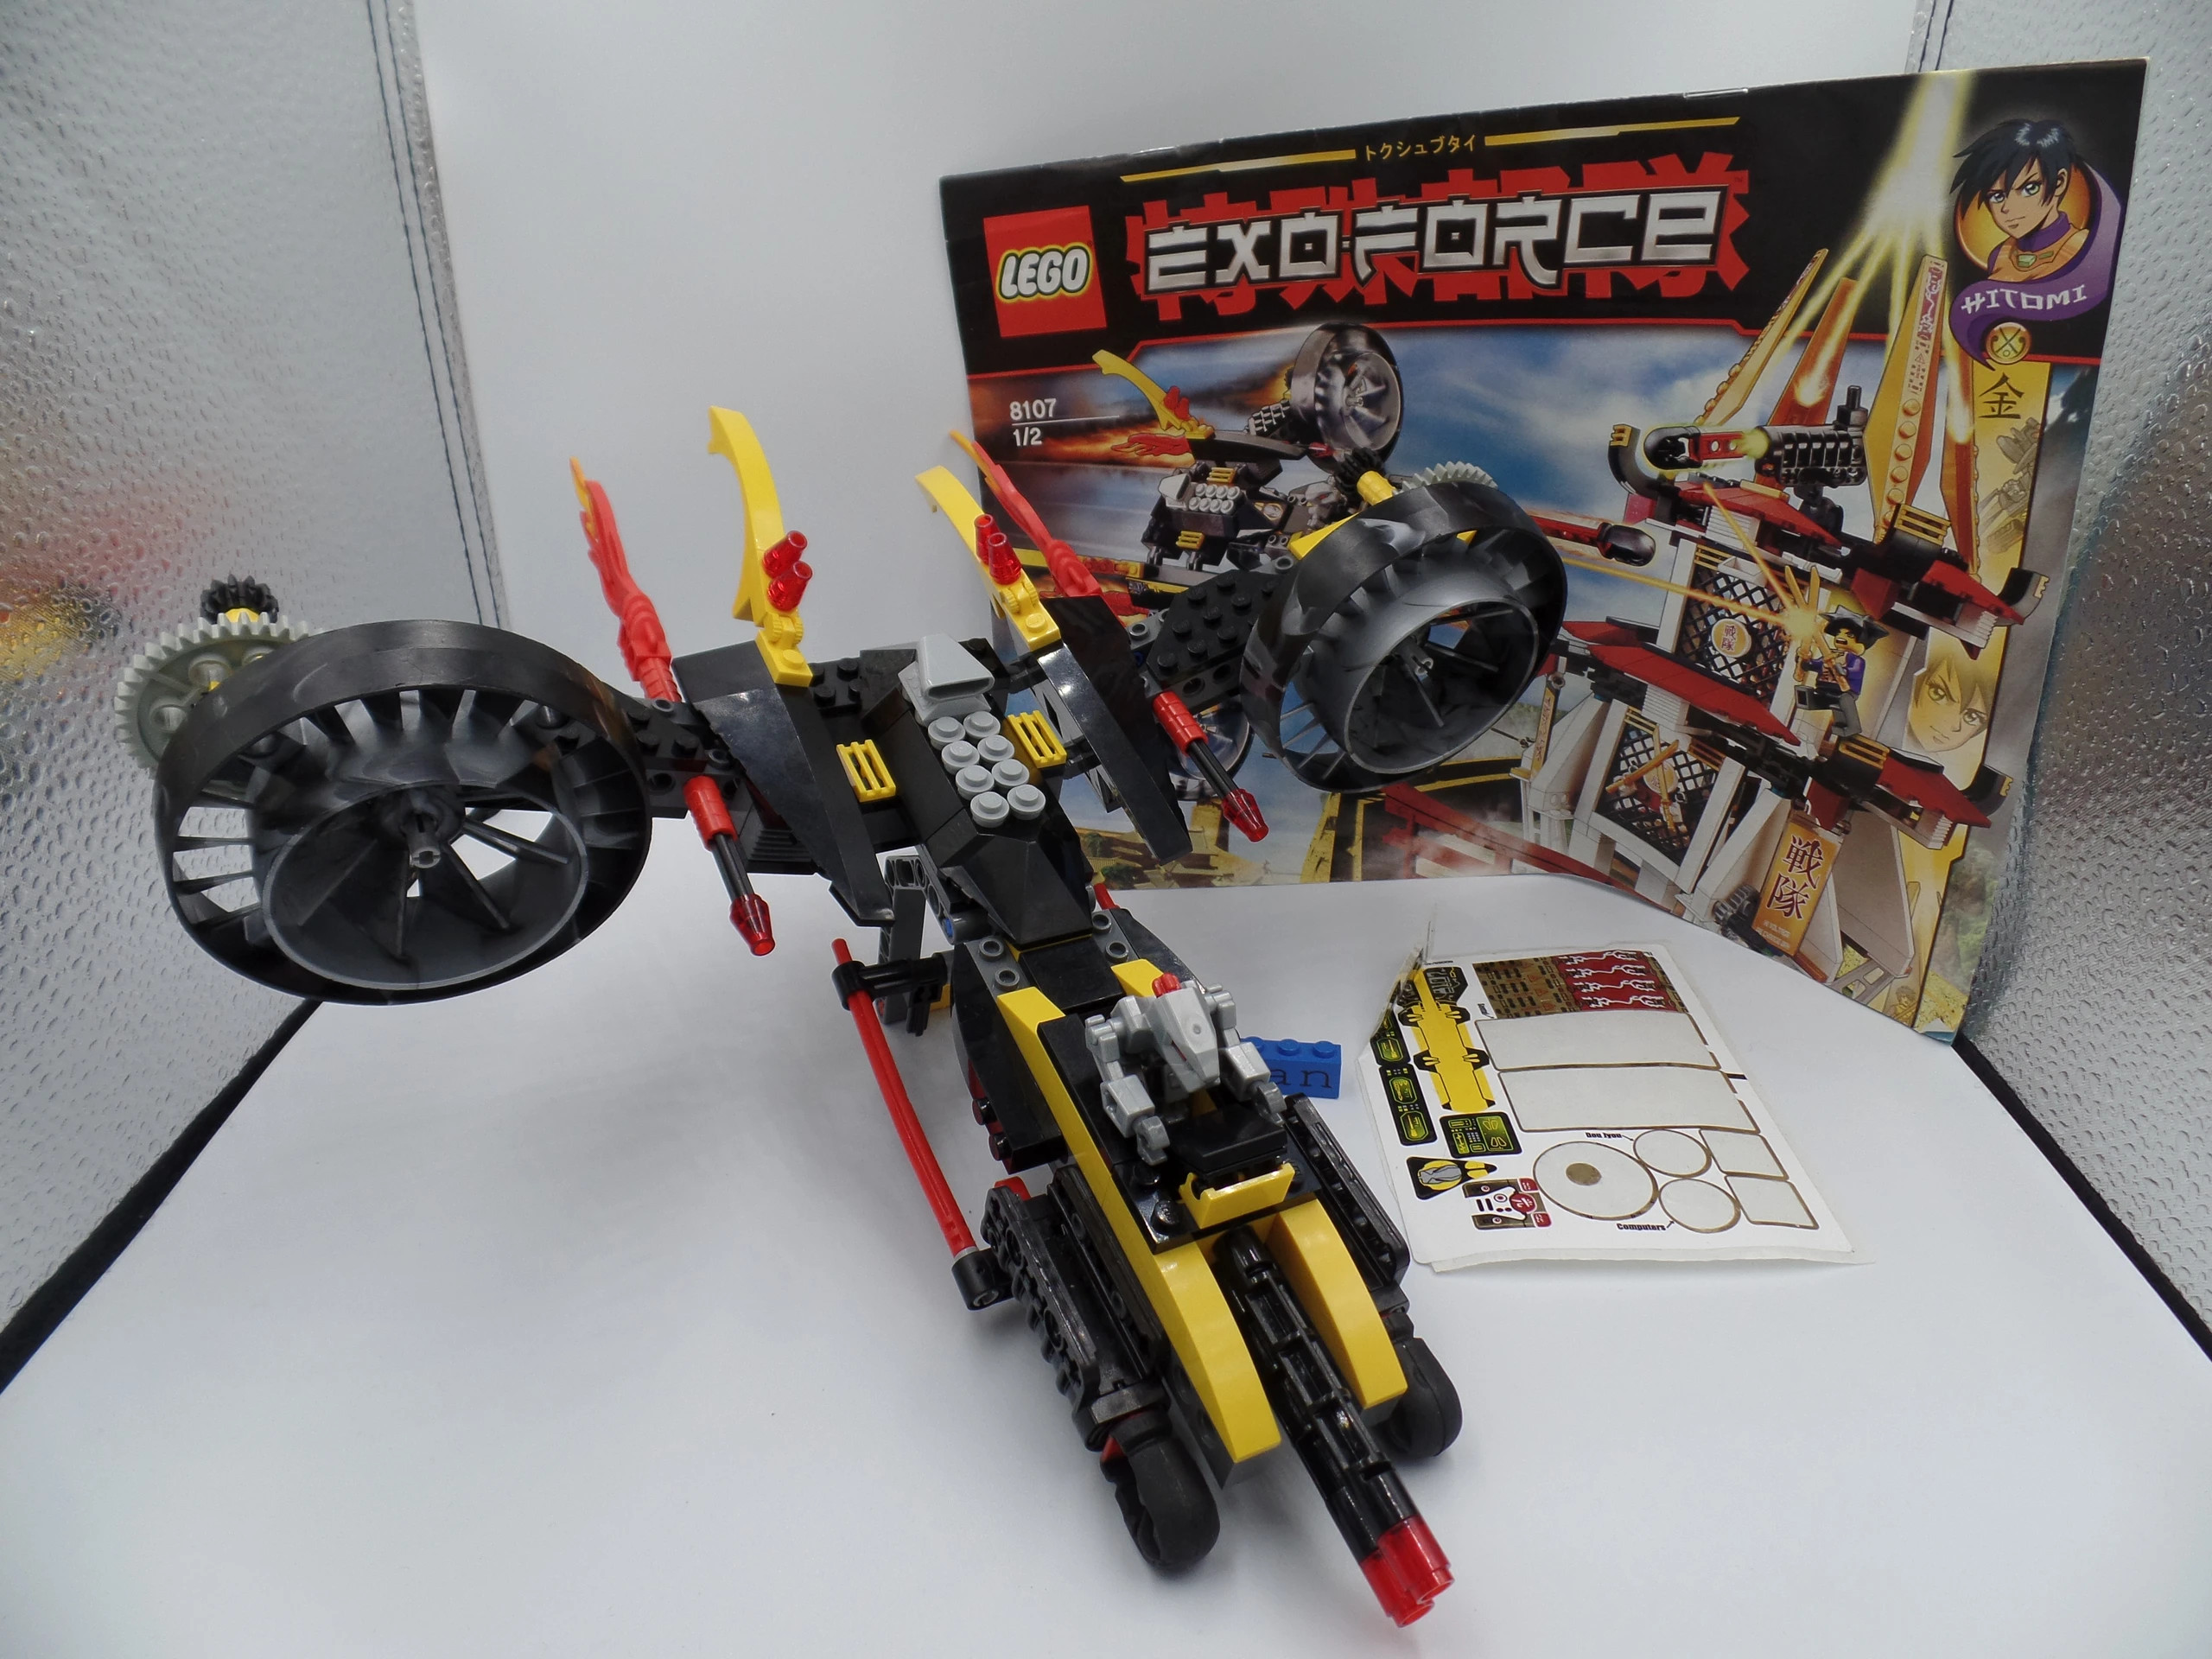 Lego Exo Force 8107 Fight for the Golden Tower | Vinted